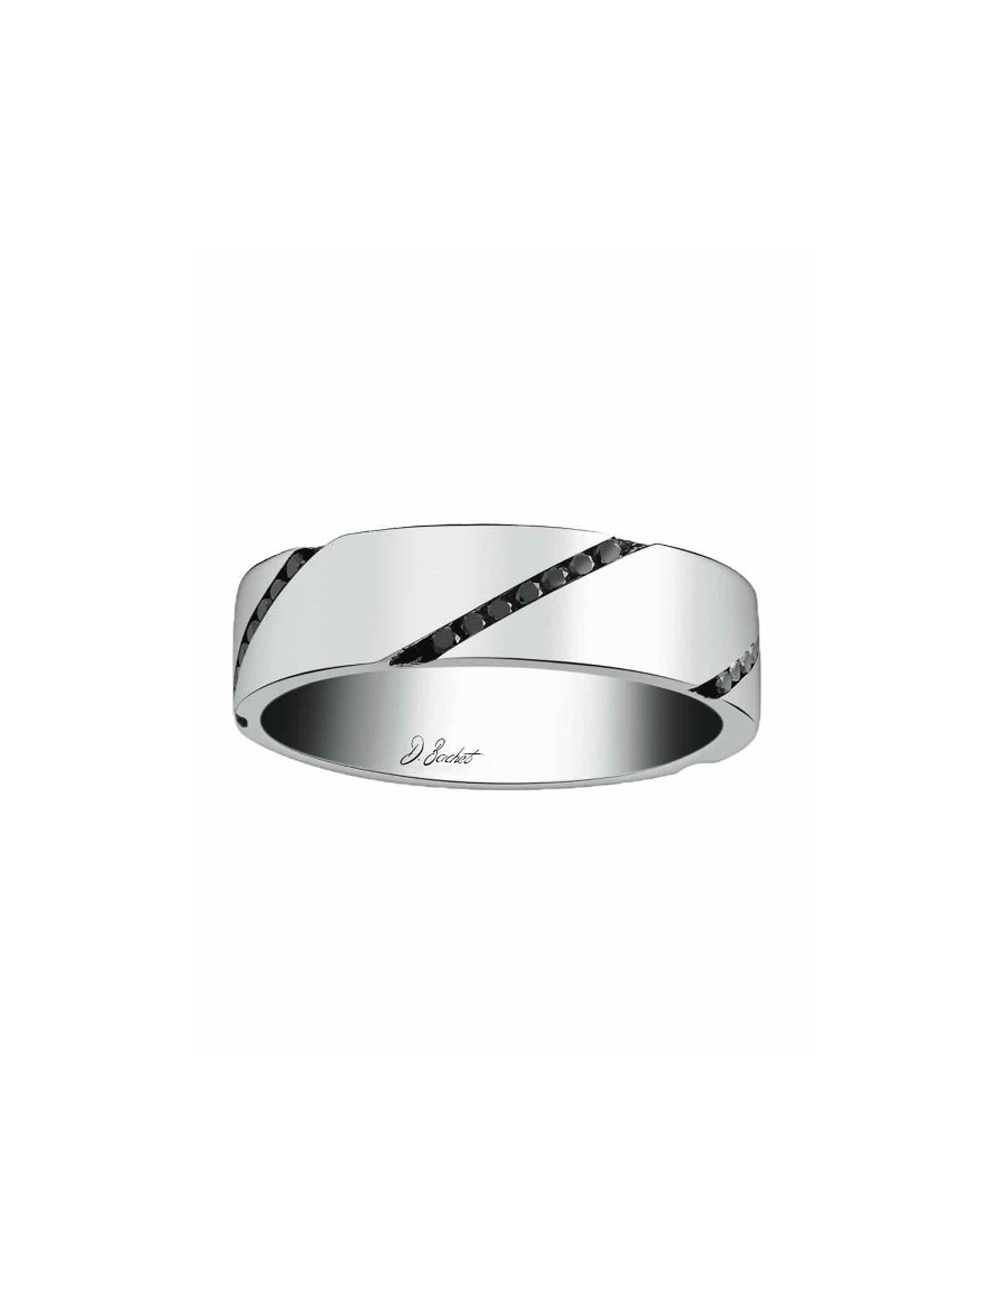 A bold and original wedding ring for men, with black diamonds set in diagonal all around the band.